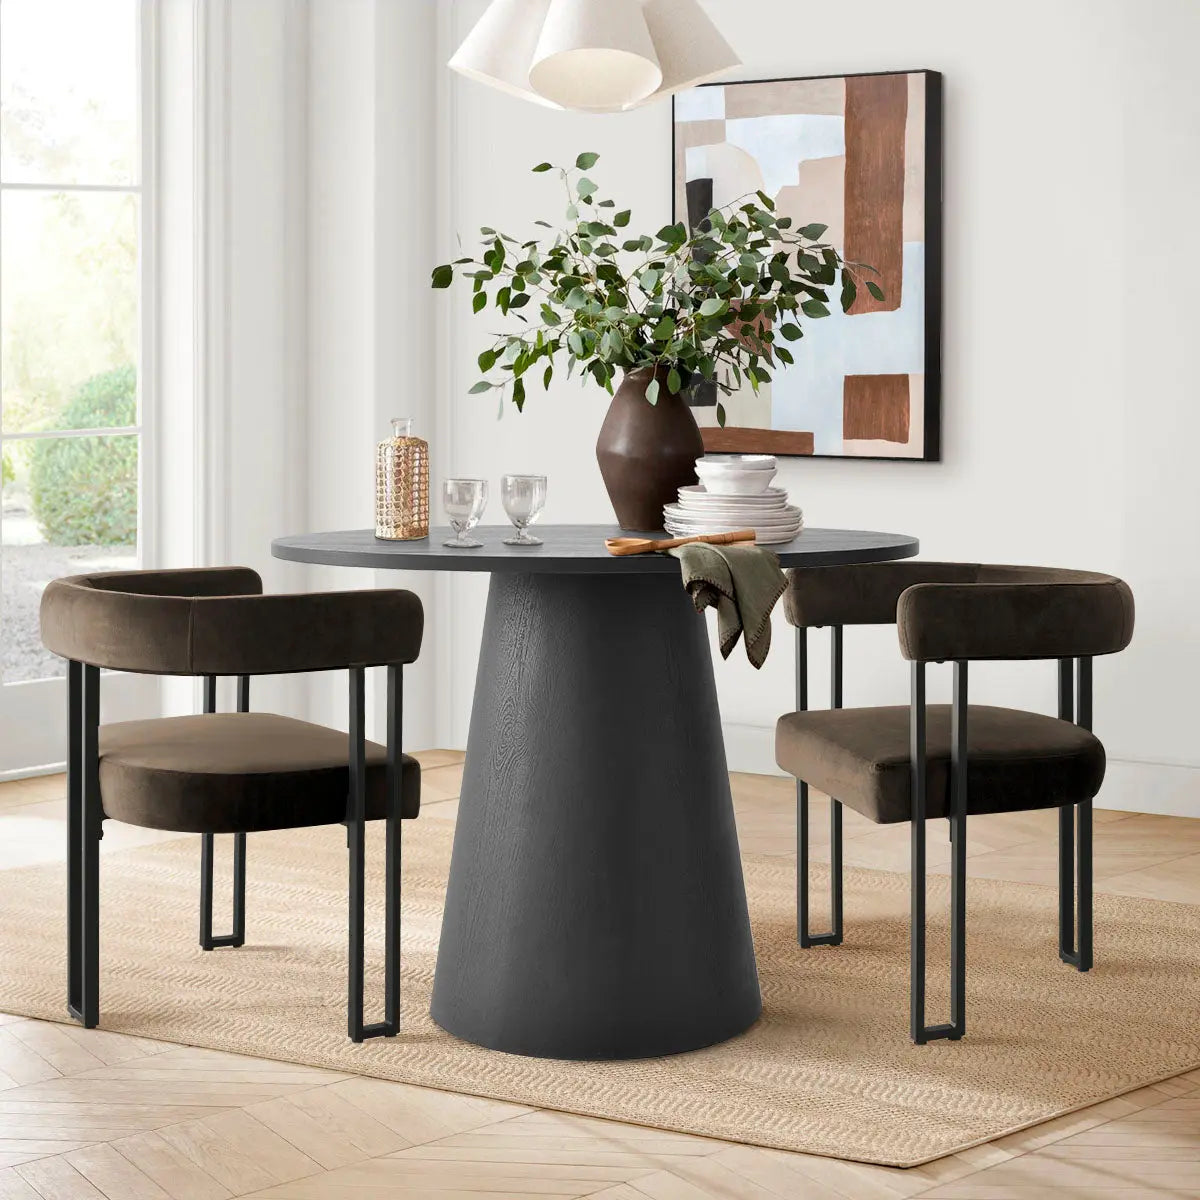 Dwen 35" Chic Black Round Dining Set for 2, With Luxurious Mia Velvet Armchair - Contemporary Design for Small Spaces The Pop Maison